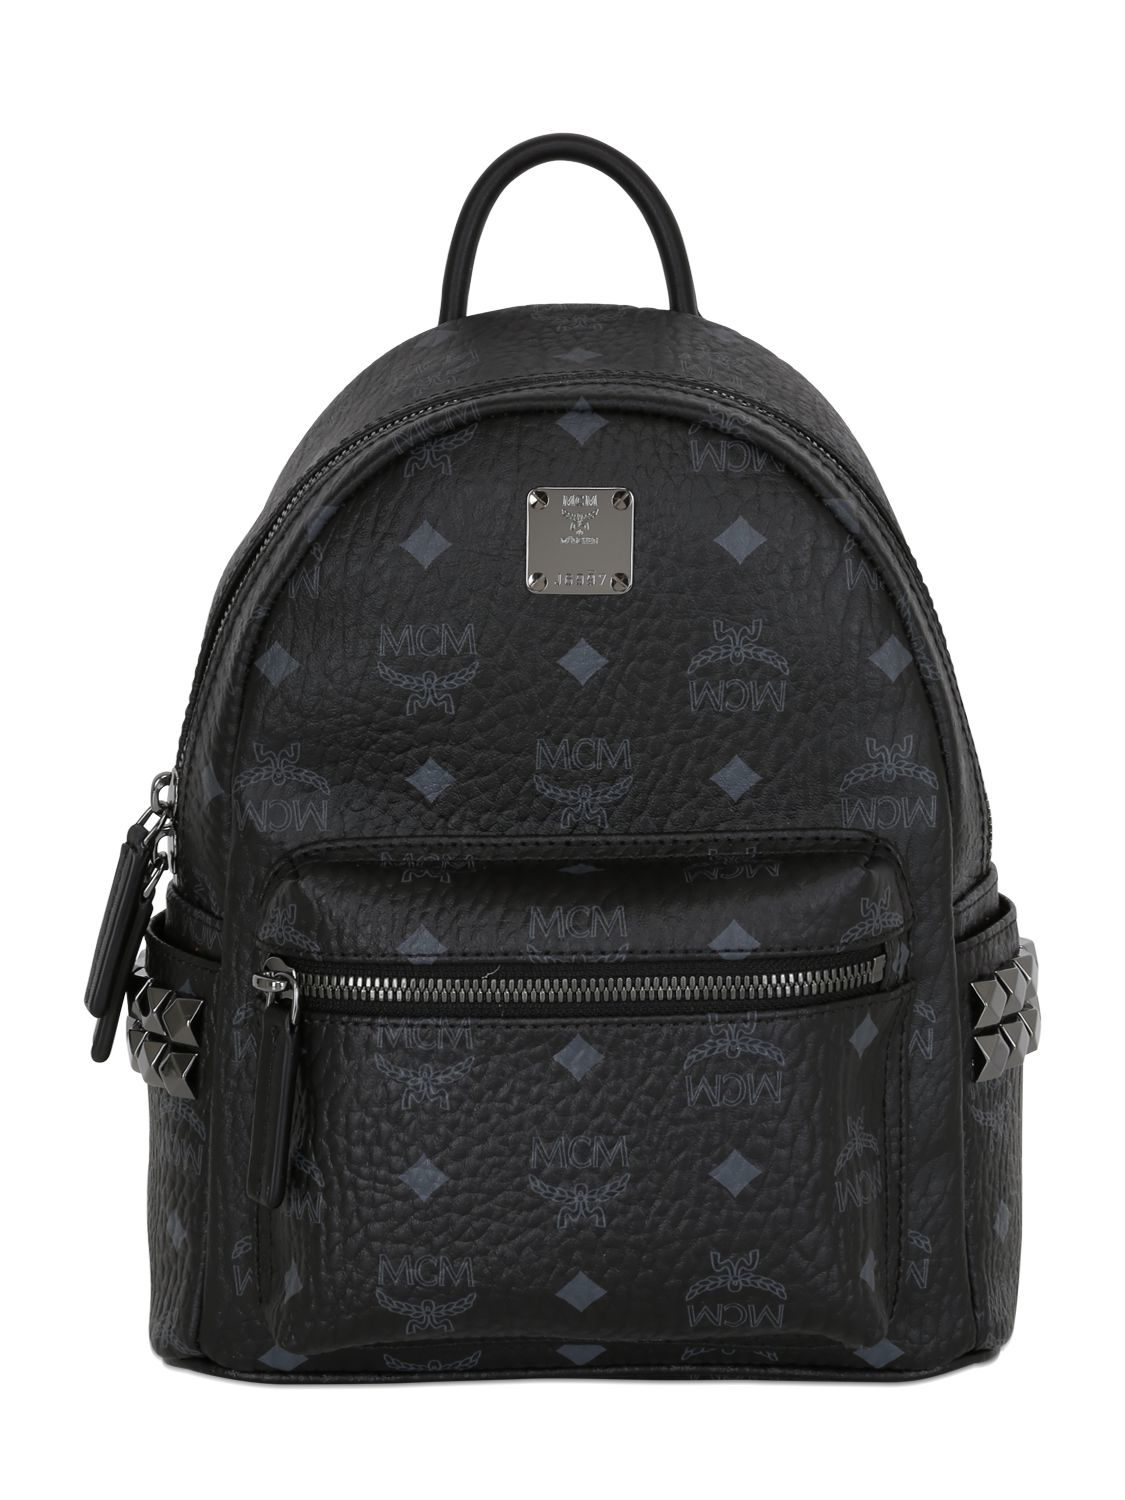 Mcm Mini Stark Faux Leather Backpack in Multicolor (BLACK) | Lyst